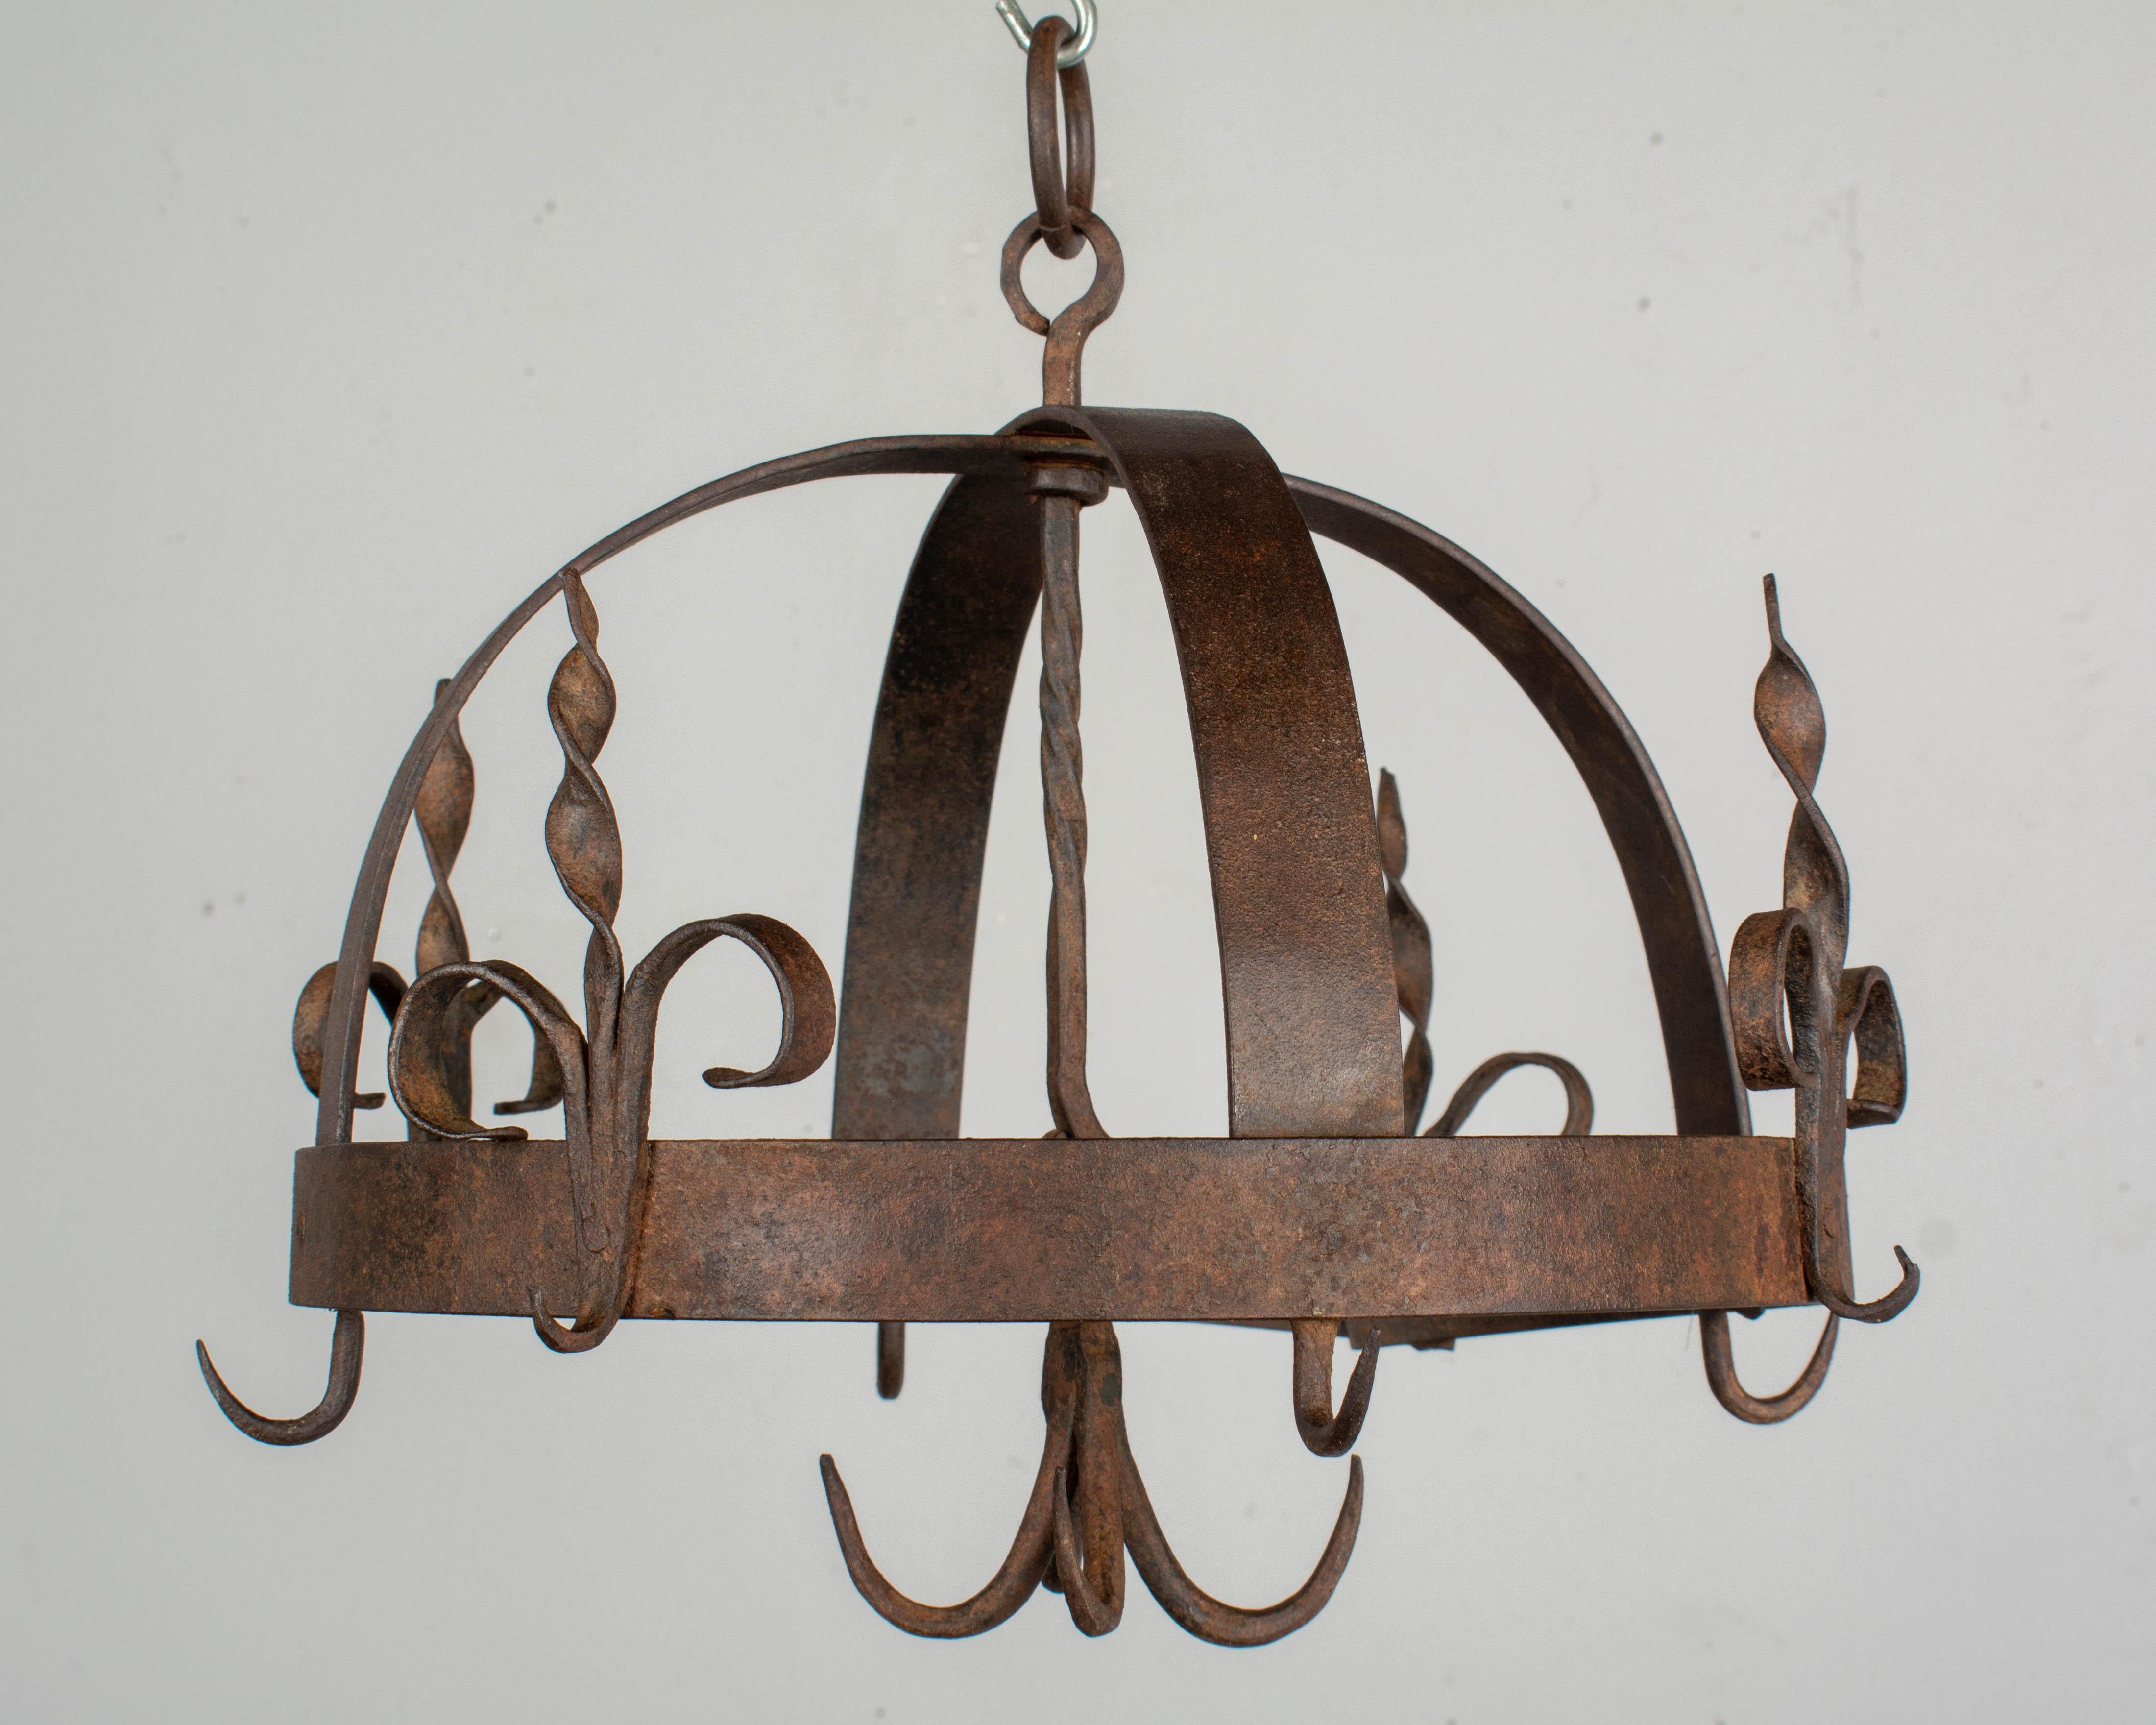 Hand-Crafted 19th Century French Wrought Iron Hanging Pot Rack